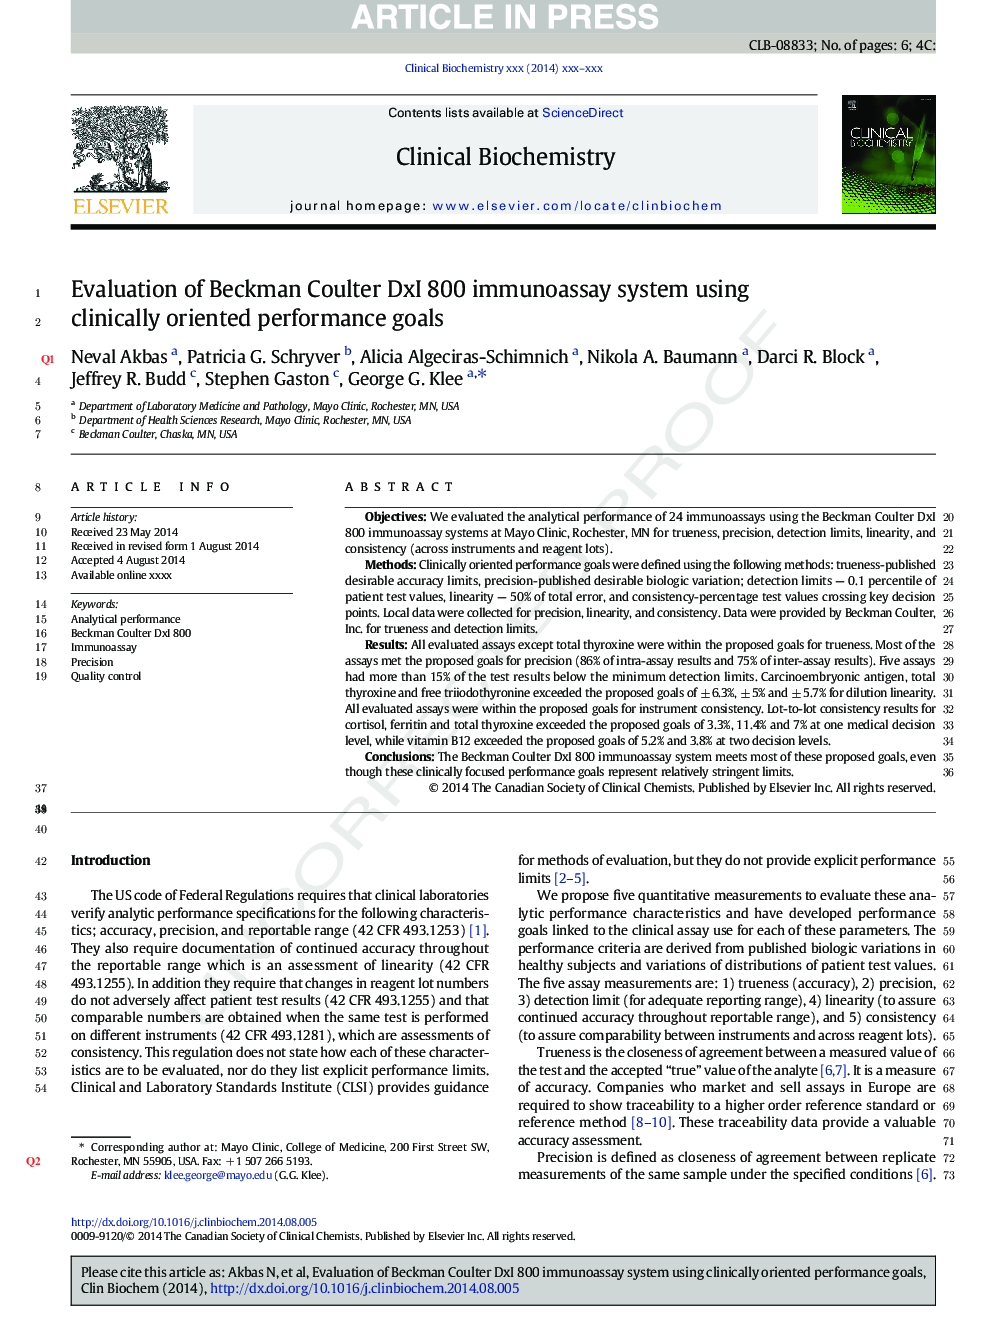 Evaluation of Beckman Coulter DxI 800 immunoassay system using clinically oriented performance goals